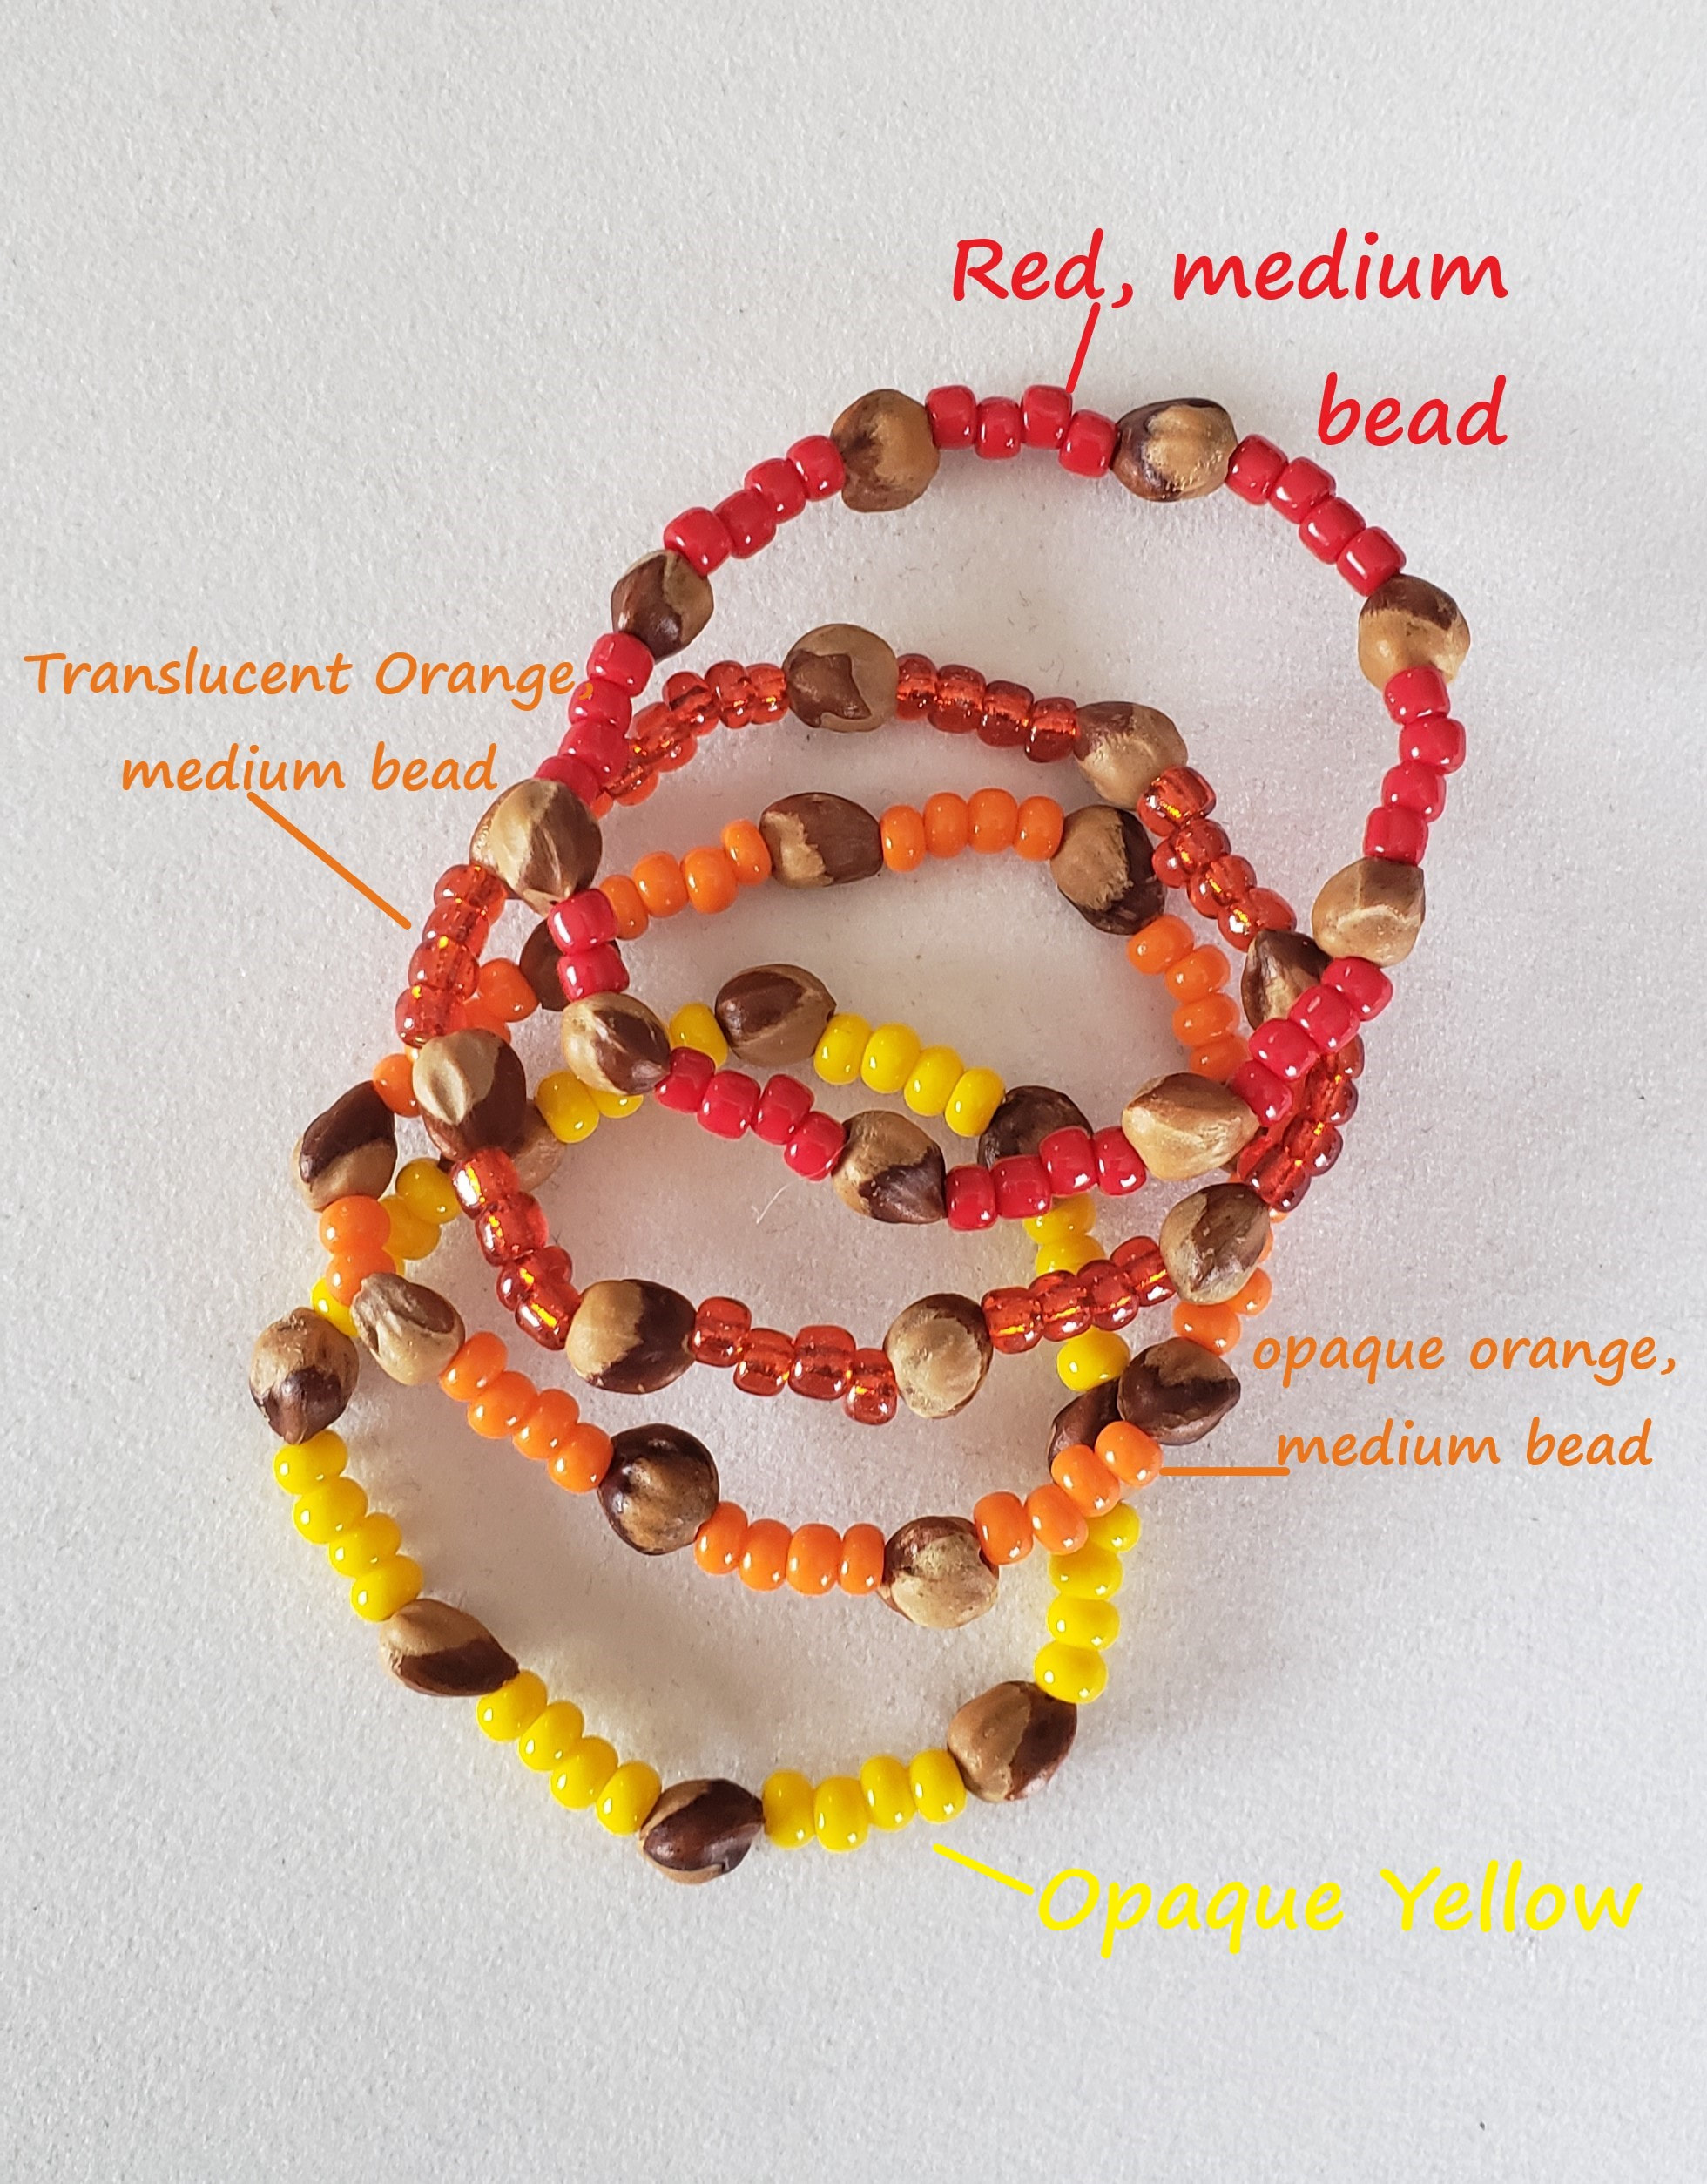 Navajo Ghost Bead and Natural Stone Necklaces - Native American Necklaces